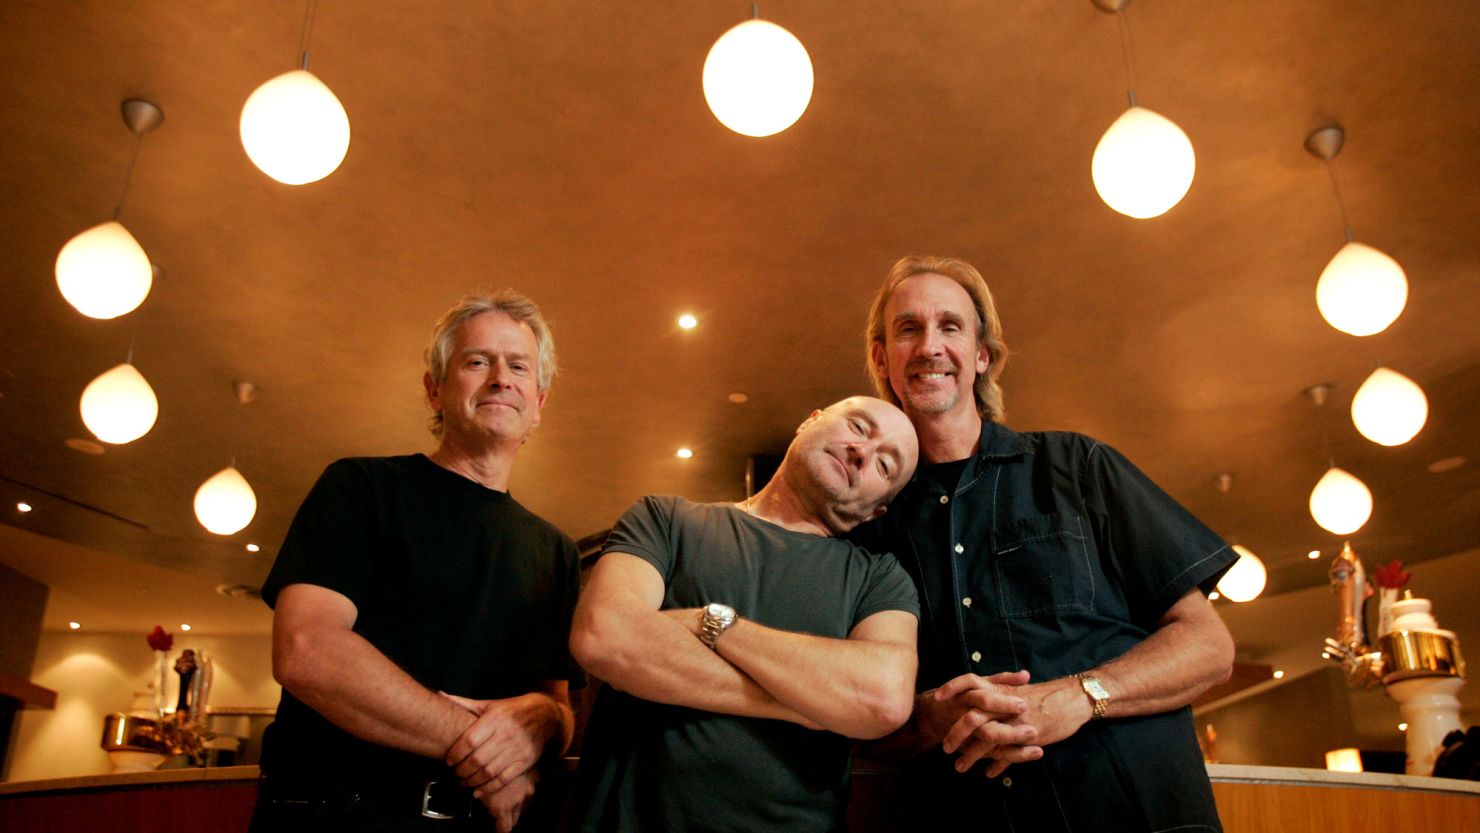 Genesis members (left to right) Tony Banks, Phil Collins and Mike Rutherford in Toronto in 2007.